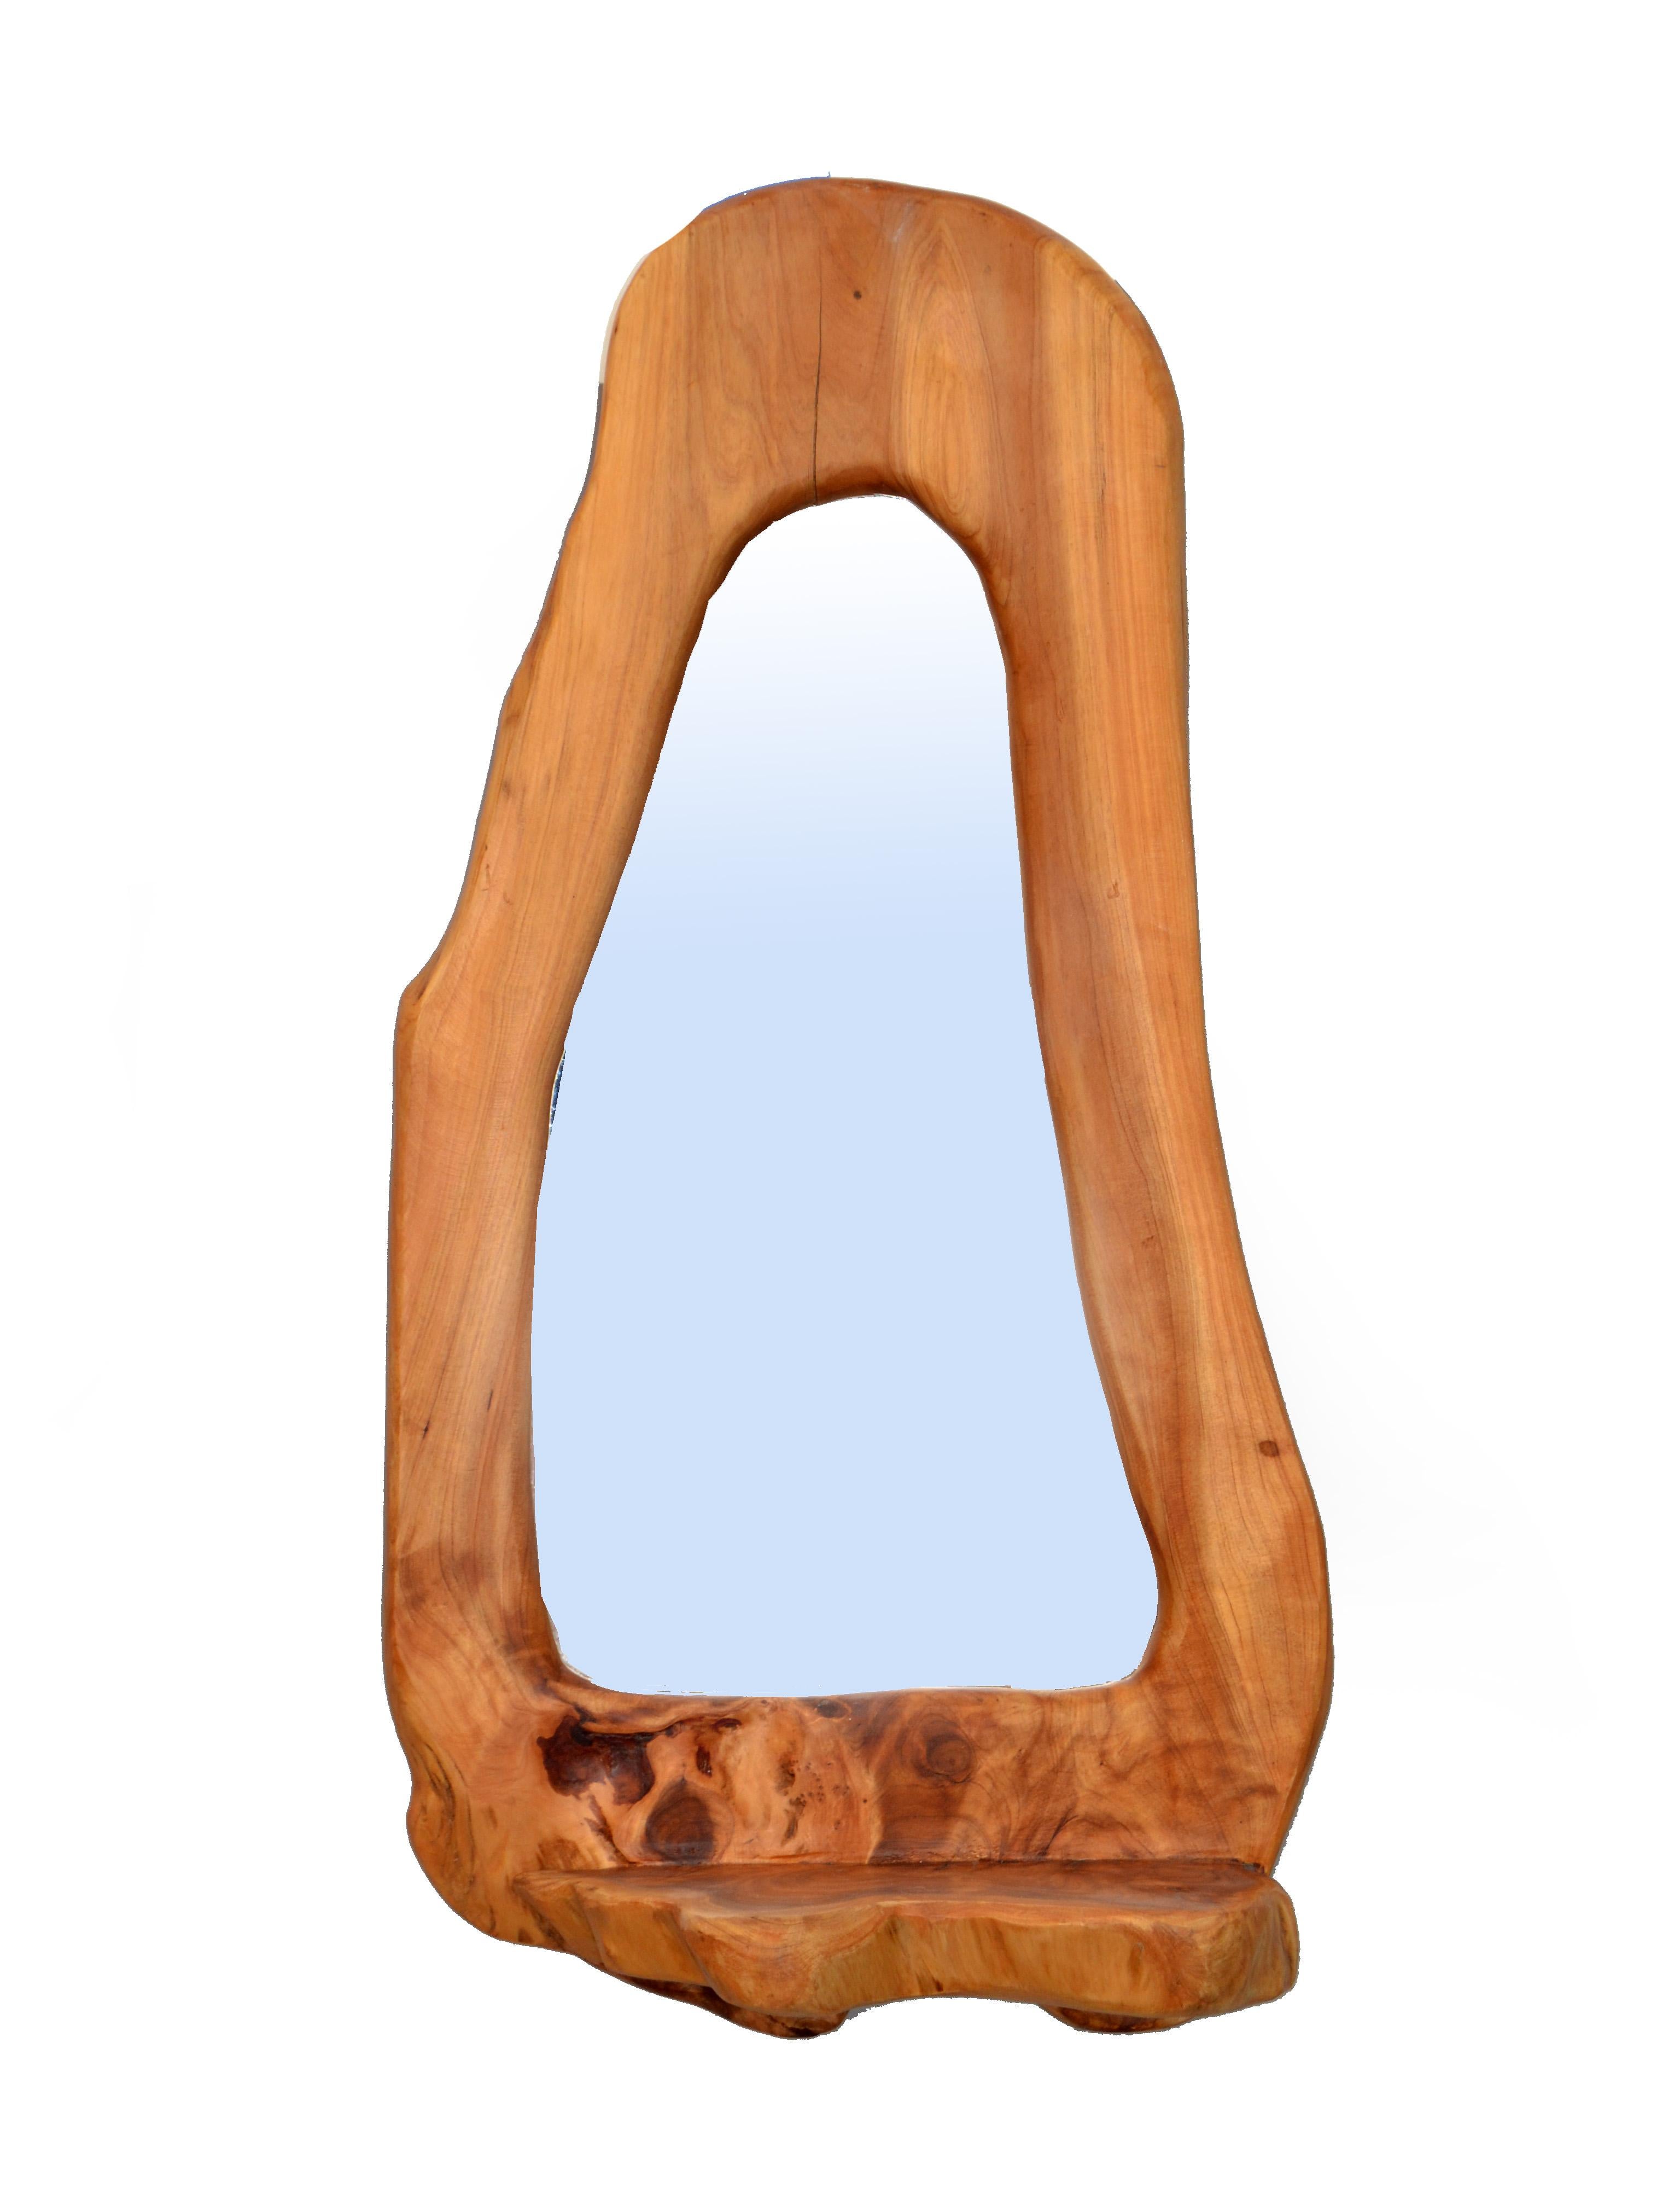 Organic Vintage American Rectangular Wall Mirror in Natural Burl Wood 1970 In Good Condition For Sale In Miami, FL